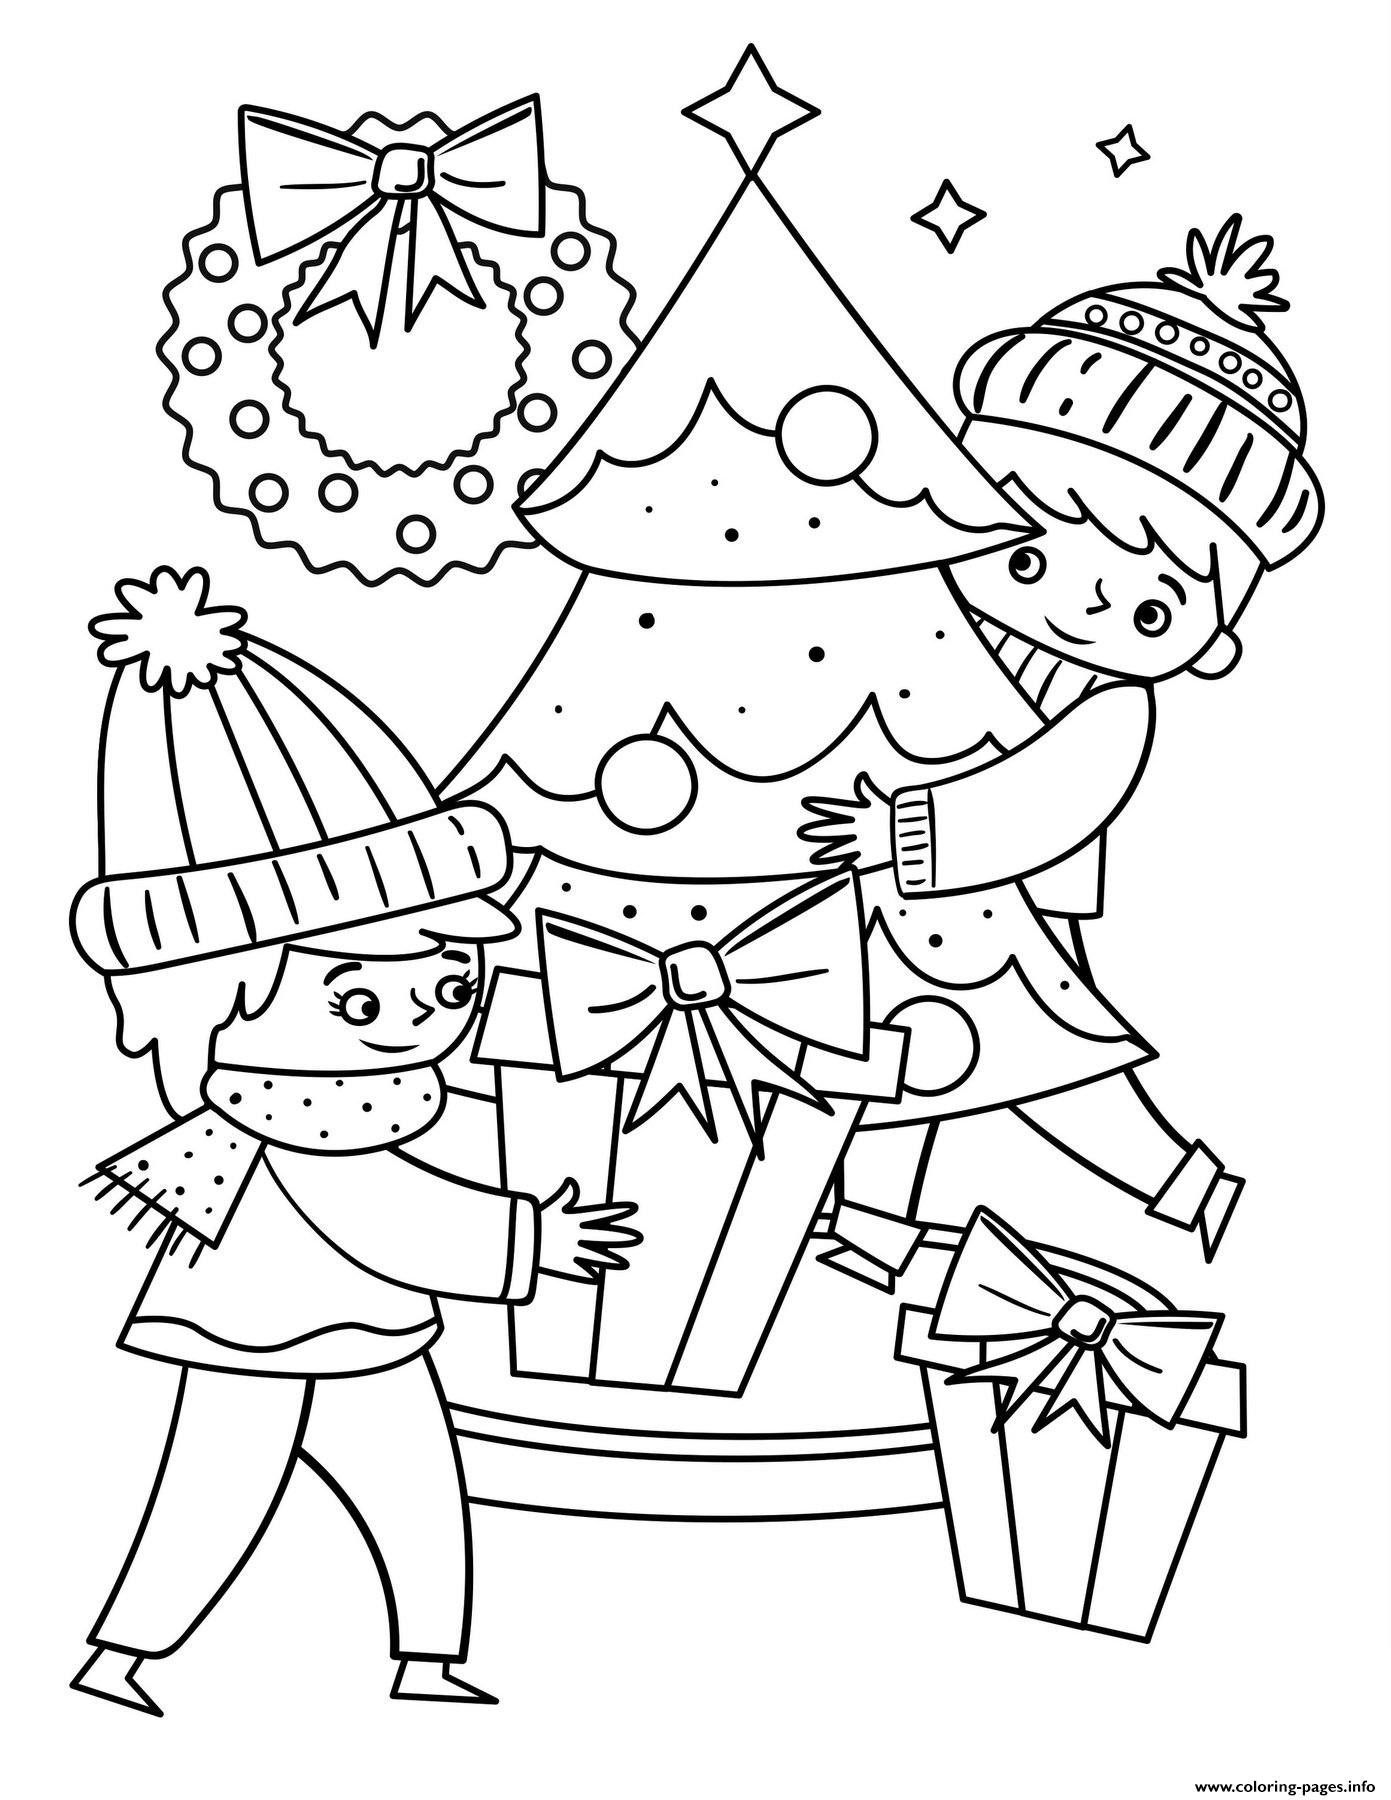 Christmas Coloring Pages For Children
 Christmas Kids Around The Christmas Tree Coloring Pages